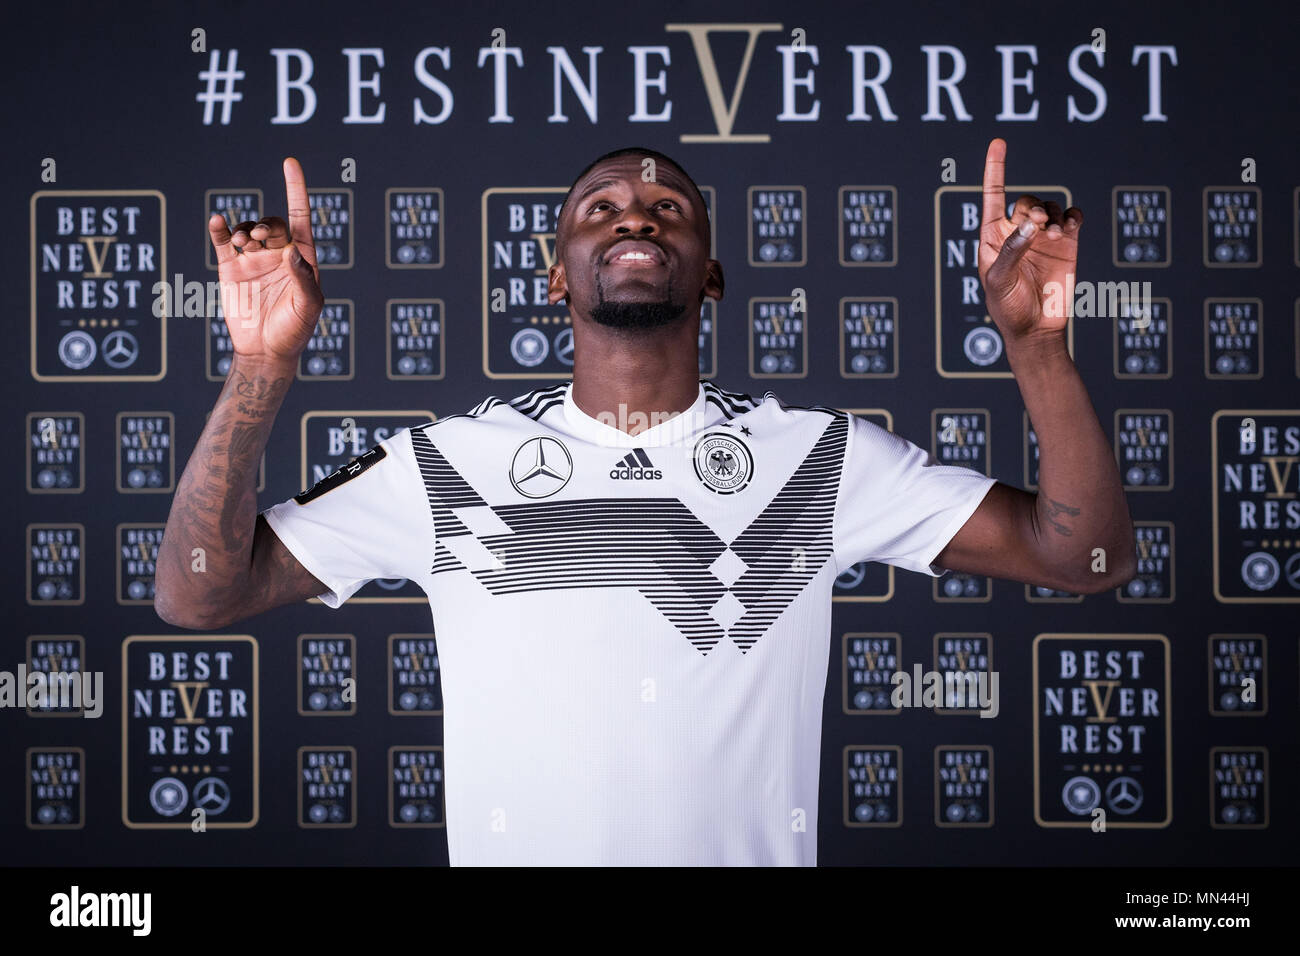 Antonio Ruediger (Germany) in front of the World Cup logo of the Mercedes- Benz Generalsupplier (# BEST NEVER REST) Preview/Archive picture: Topic of  the caderbekanntgabe on 15.05.2018- GES/Football/DFB-Marketingtag in the  Filmstudios Babelsberg, Berlin,